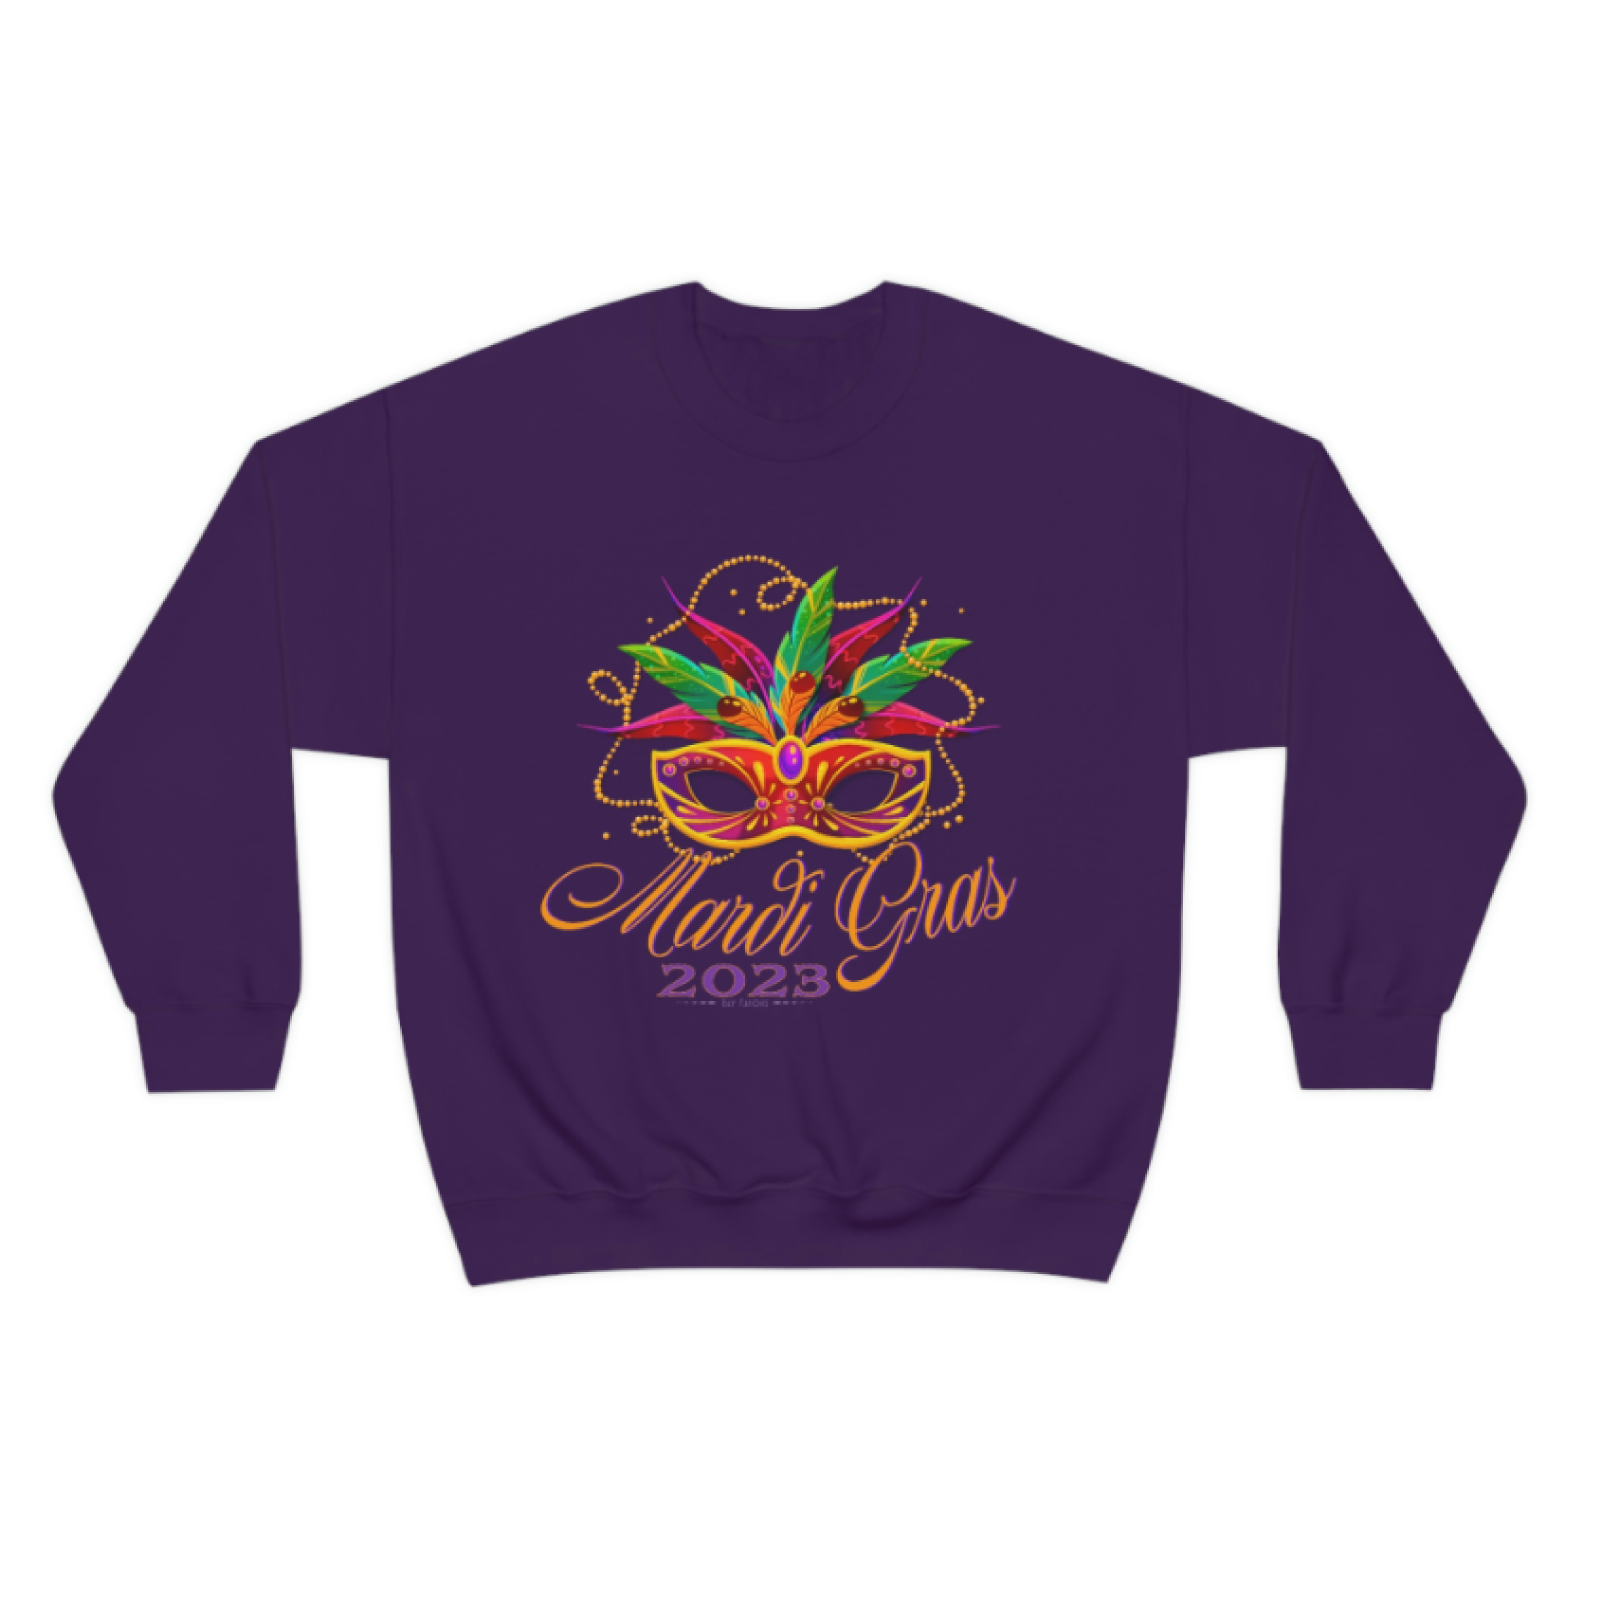 Mardi Gras sweatshirt in several colors featuring colorful mask